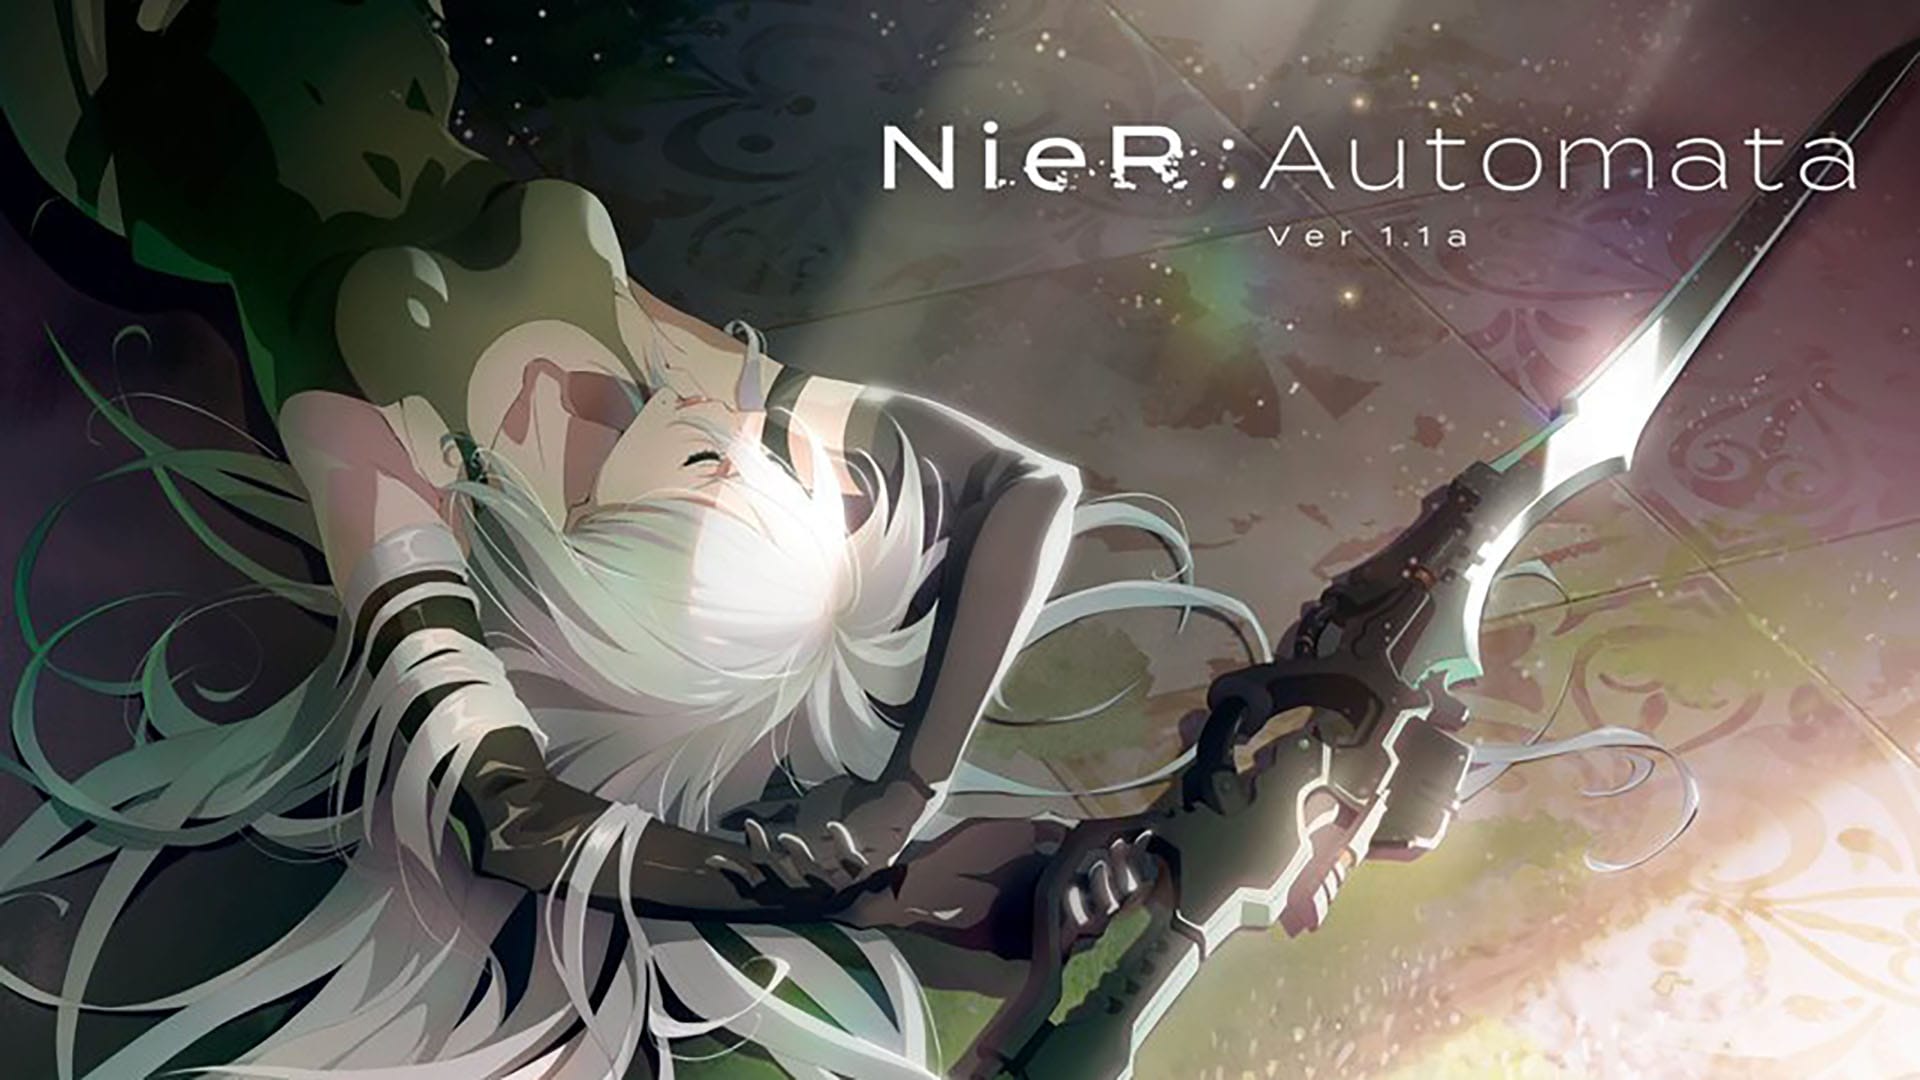 Nier Automata Ver11a Anime Series Will Arrive in January 2023  IGN